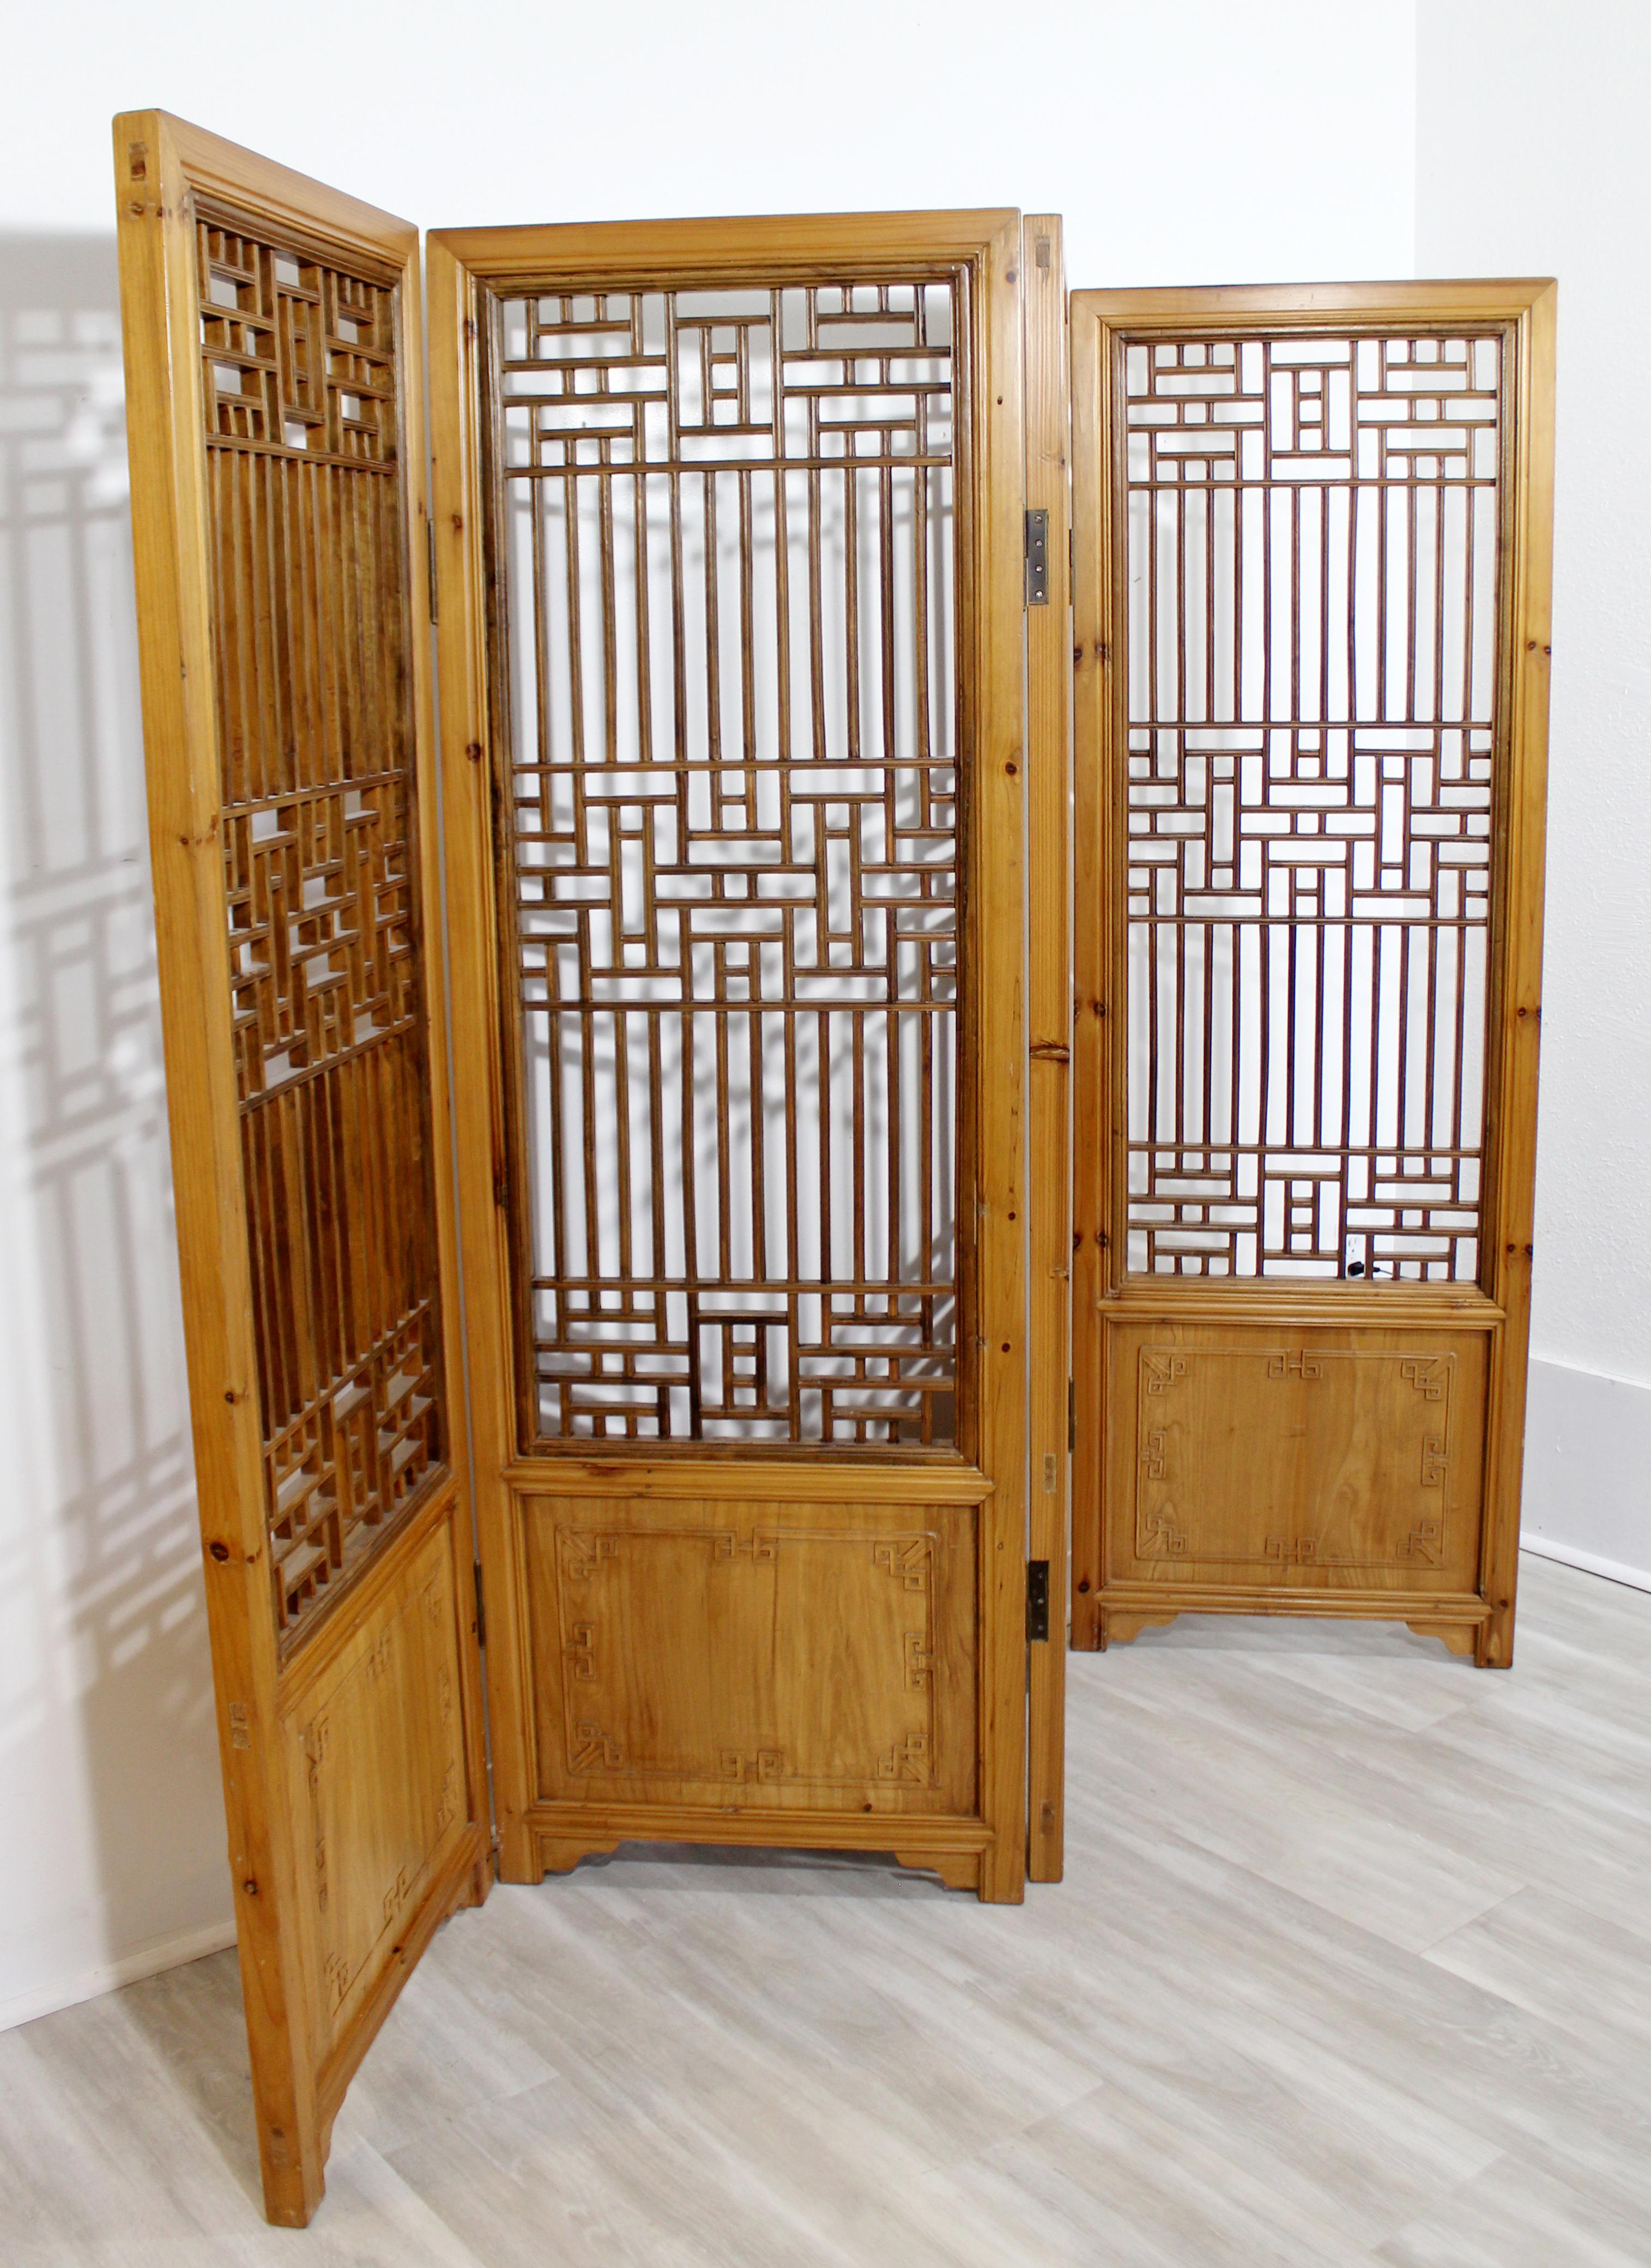 For your consideration is a splendid, Asian, carved wood, four panel screen or room divider, circa 1990s. In very good condition. Each panel is 22